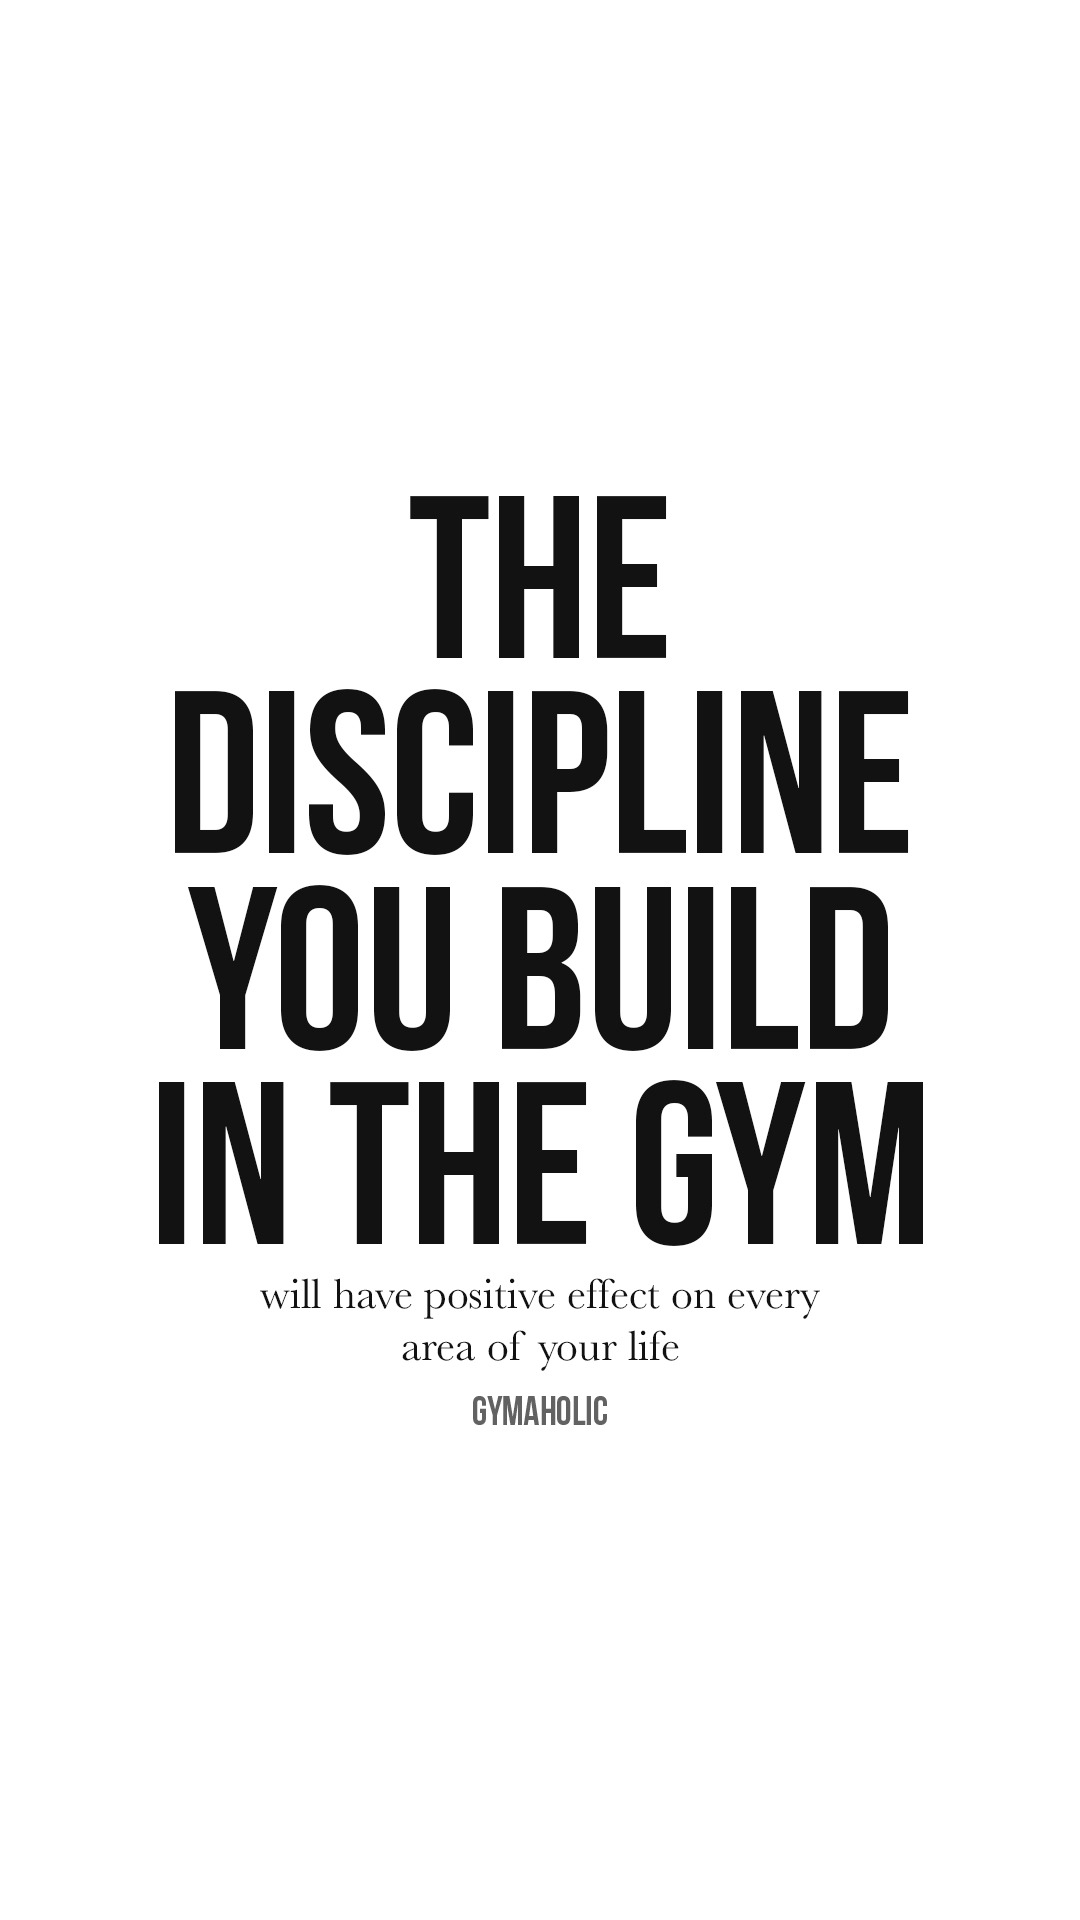 The discipline you build in the gym